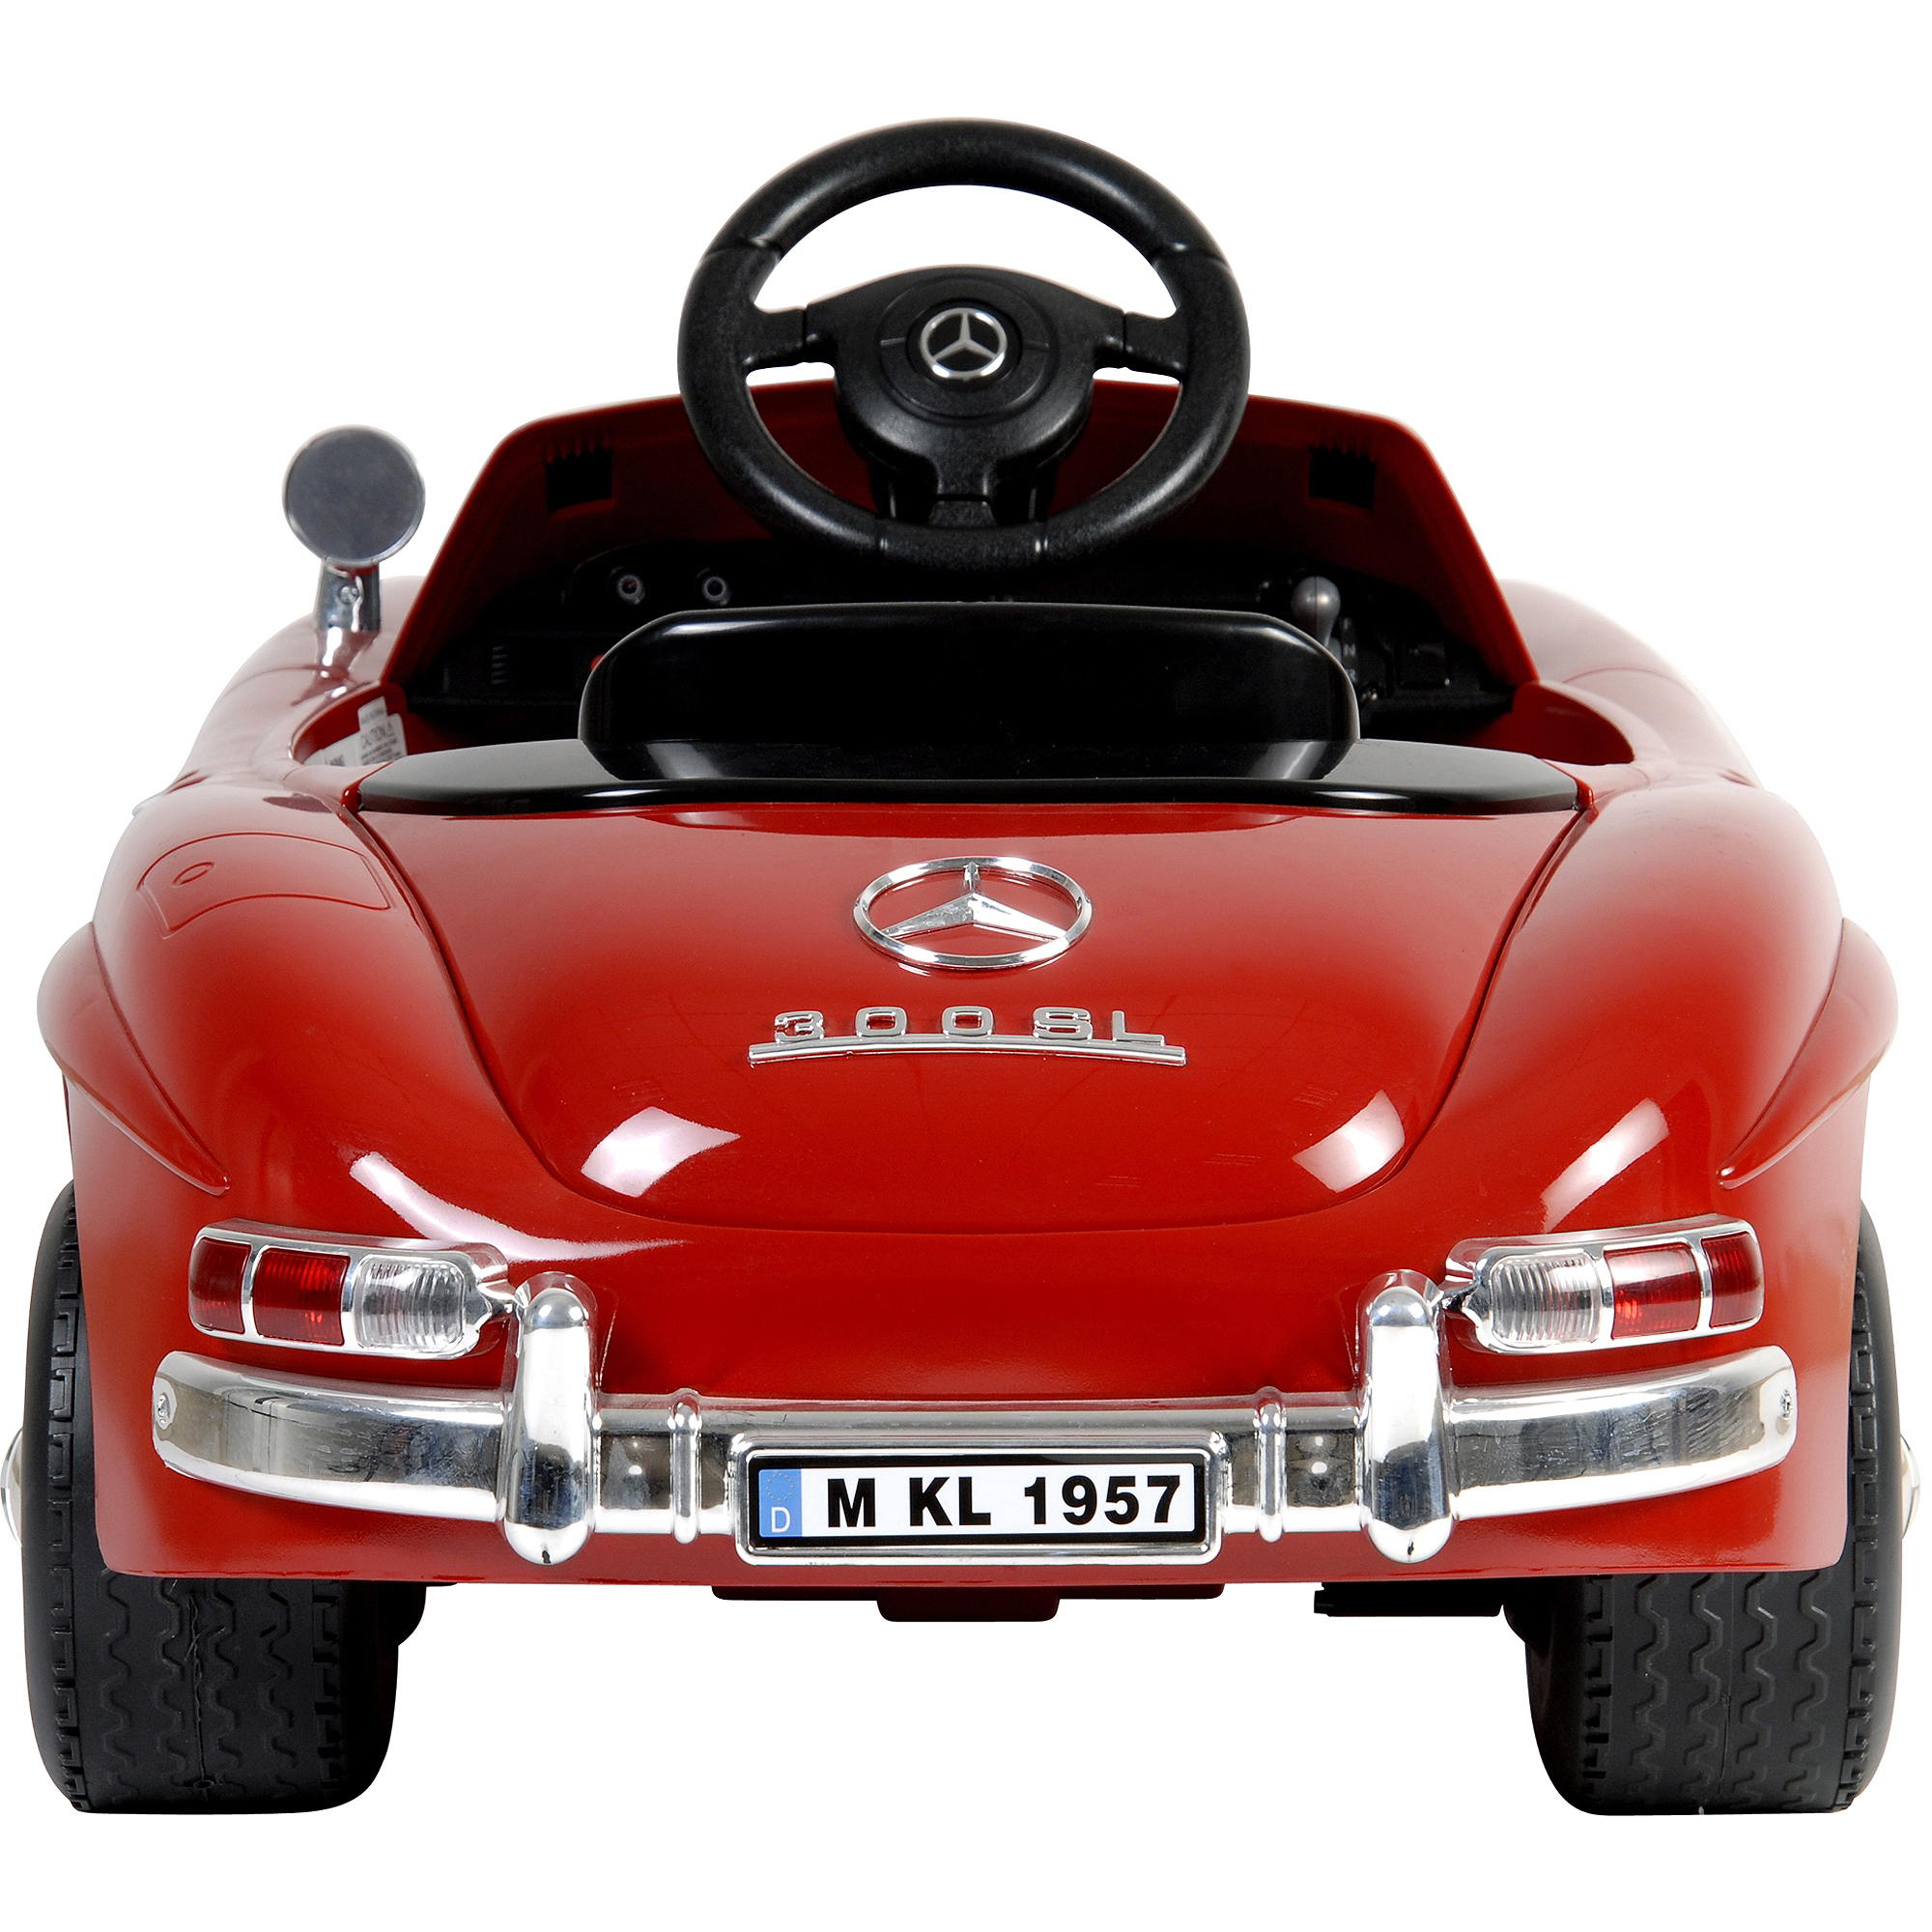 Kalee Mercedes-Benz 300SL W 198 12-Volt Battery-Powered Ride-On, Red - image 3 of 4